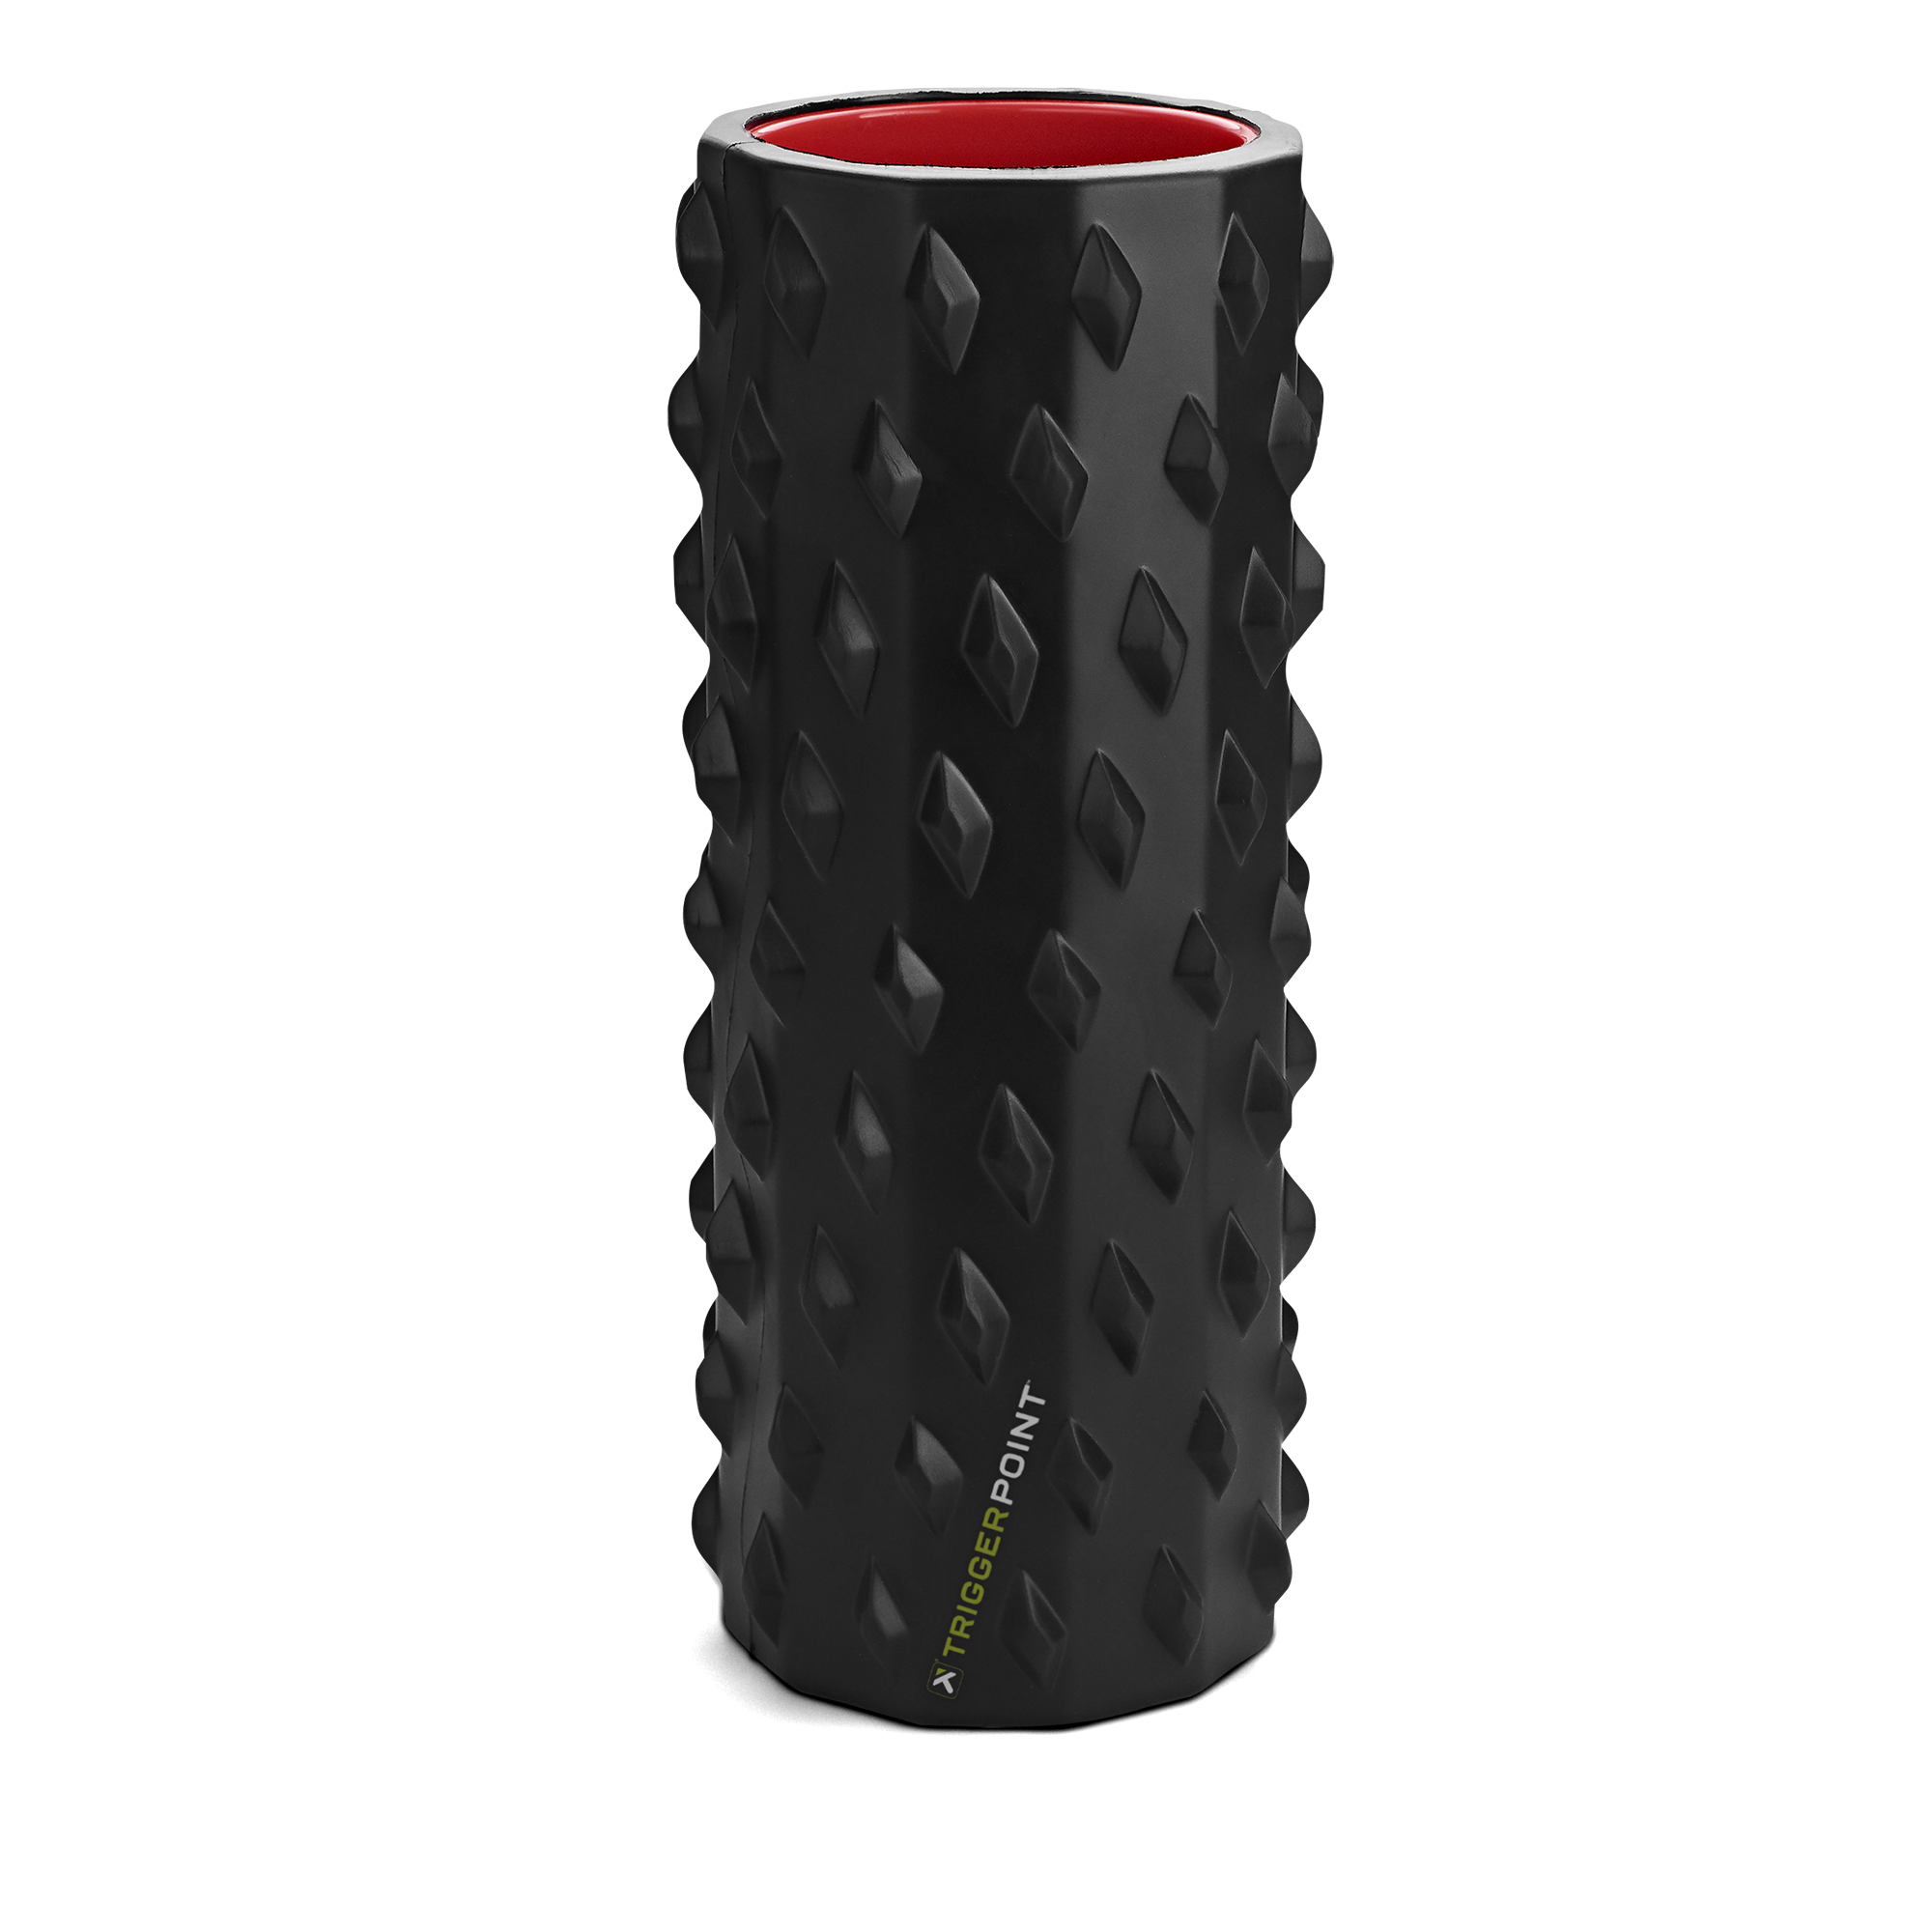 TriggerPoint | Foam Roller - Carbon - XTC Fitness - Exercise Equipment Superstore - Canada - Foam Roller